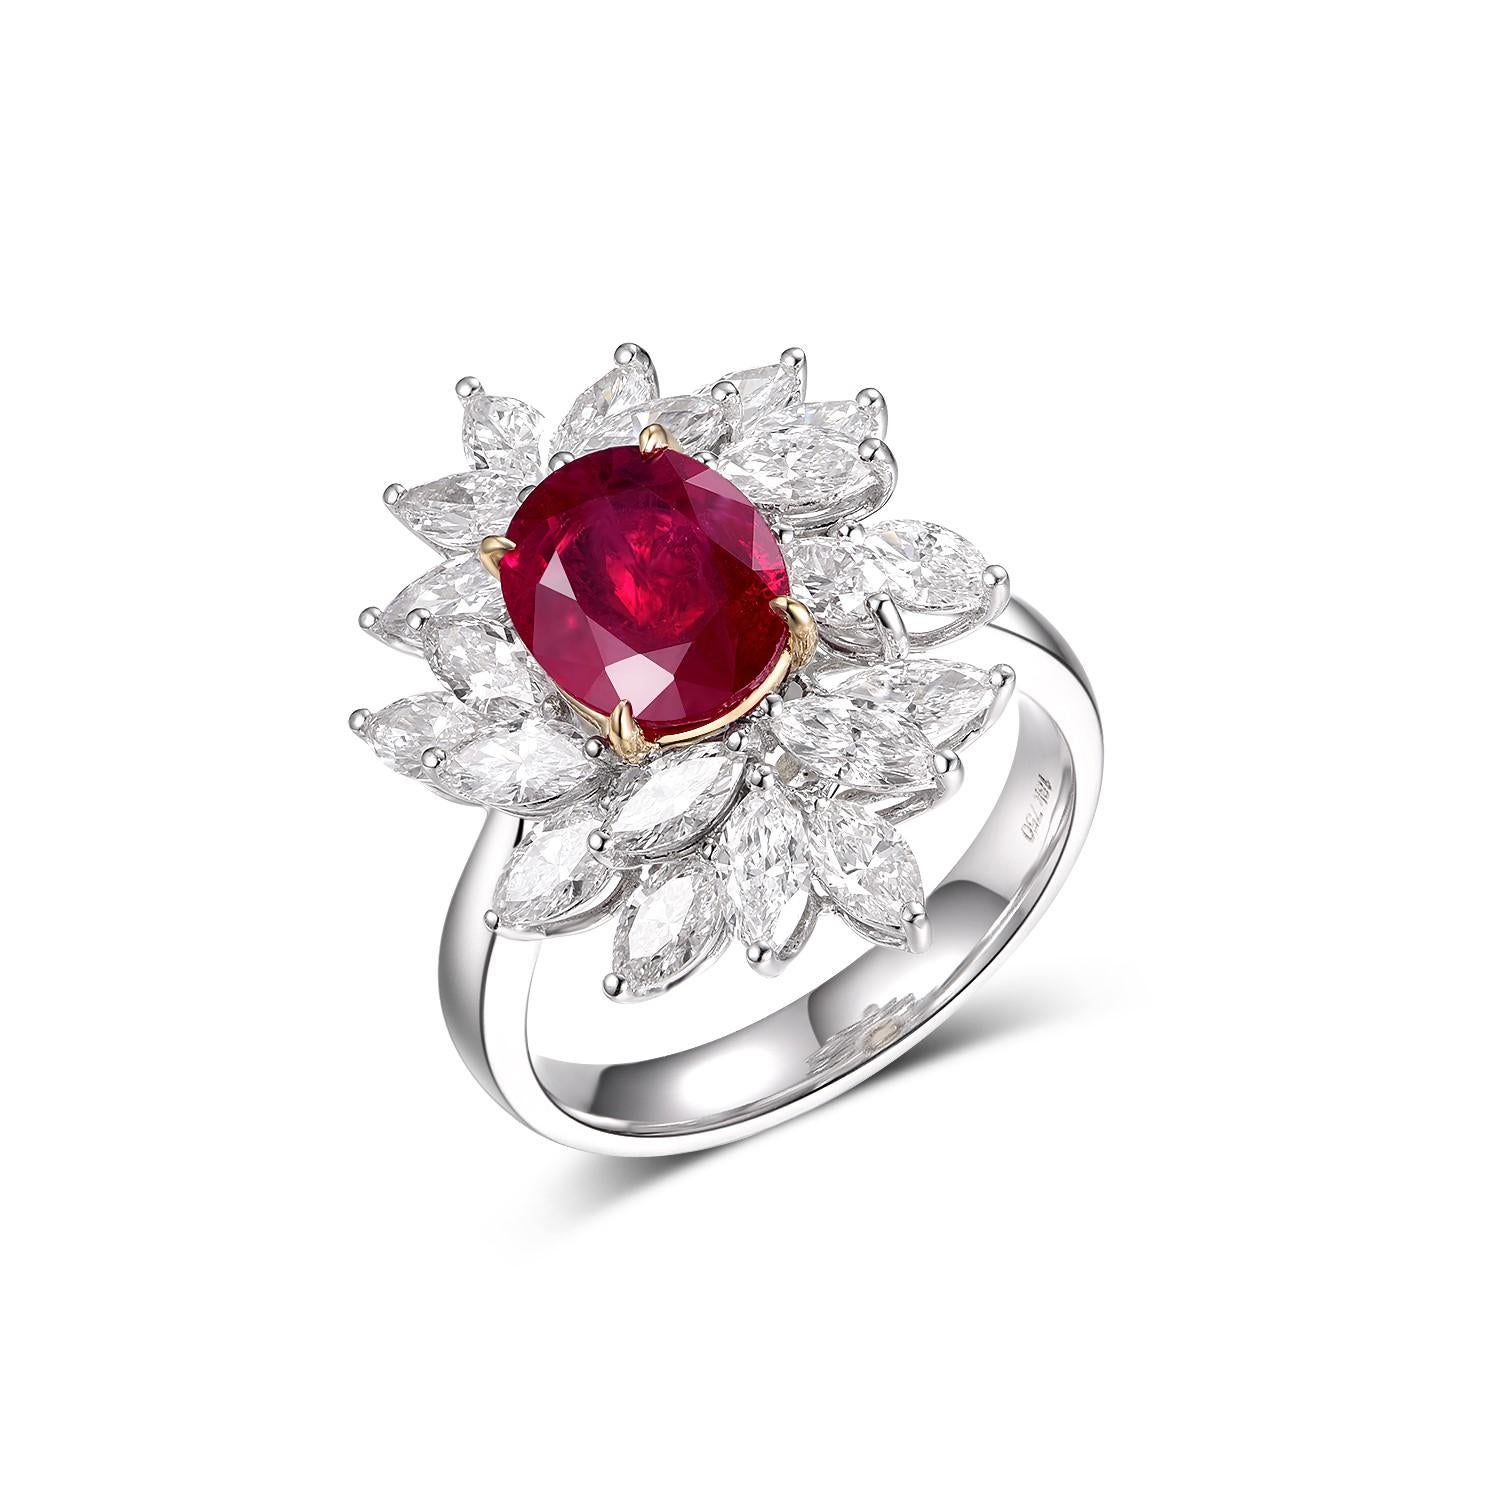 Emanating an air of timeless elegance, this Ruby Diamond ring is a mesmerizing fusion of luxury and sophistication. Meticulously set in a gleaming 18 karat white gold setting, every element of this piece accentuates its regal aura.

Taking center